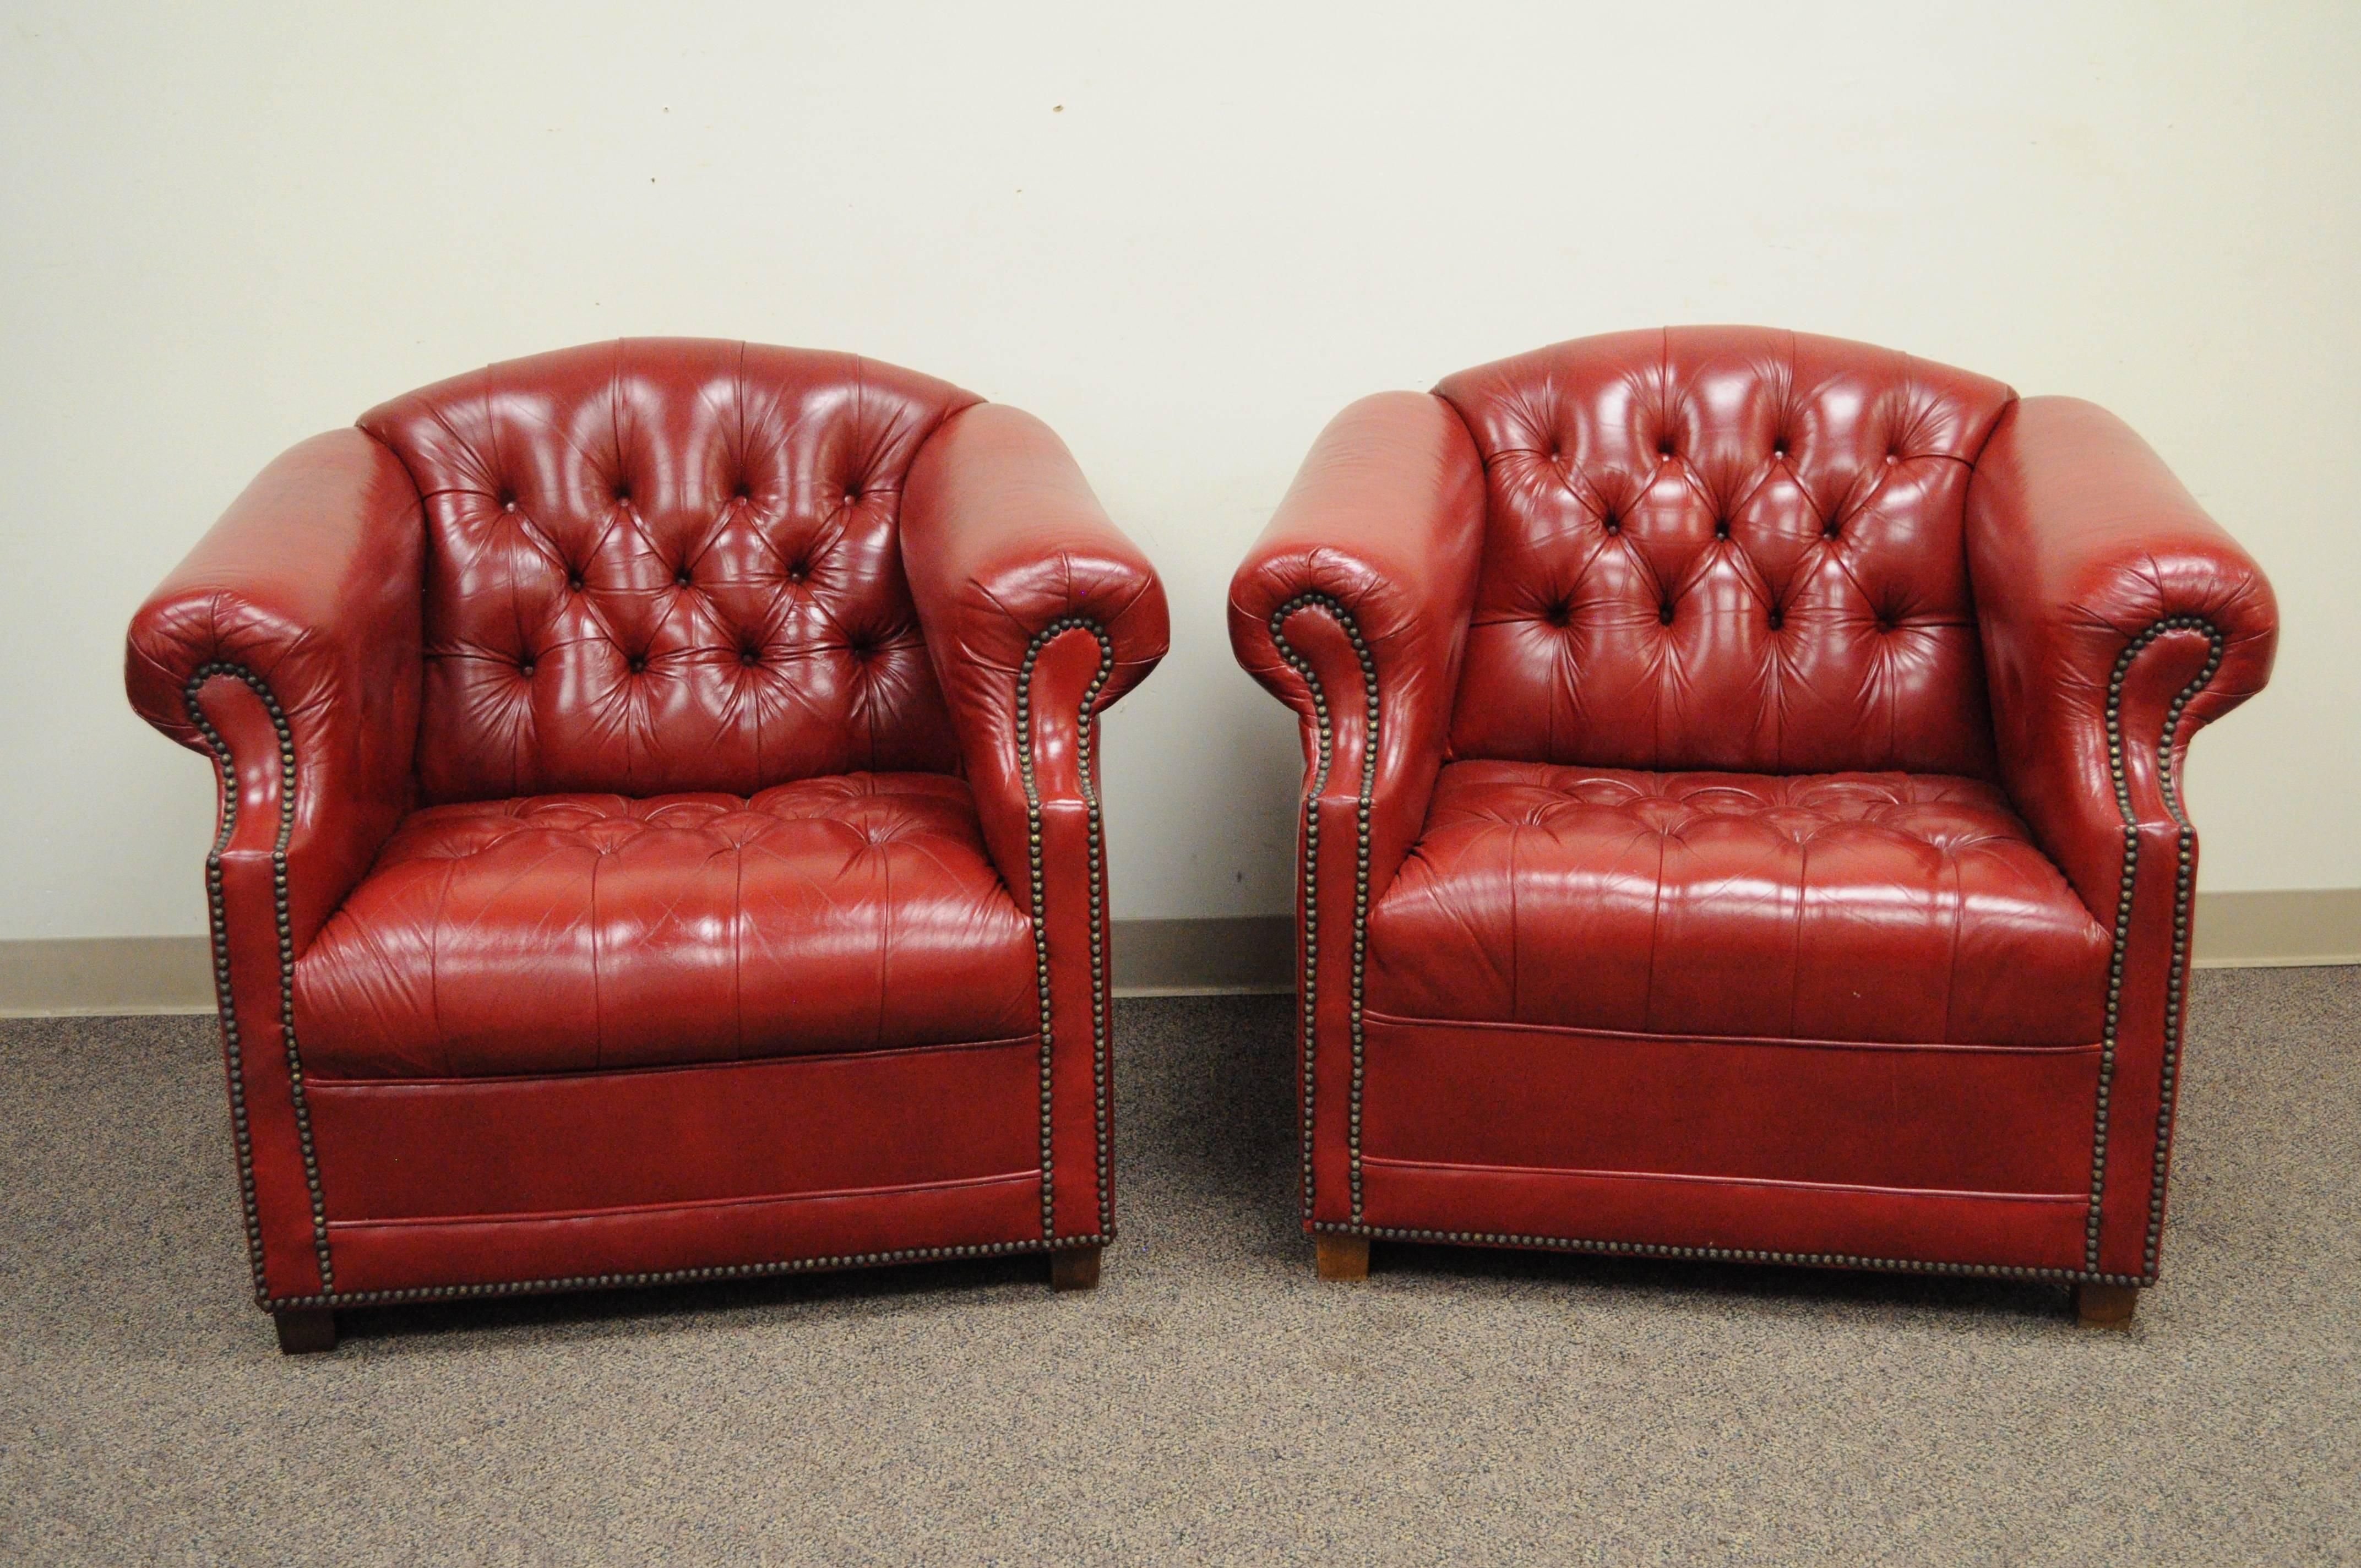 Pair of American made red leather English chesterfield style tufted club chairs by Jasper Seating Oo. Chairs feature deep red leather upholstery, rolled arms, nailhead trim, wooden feet, great form. 30